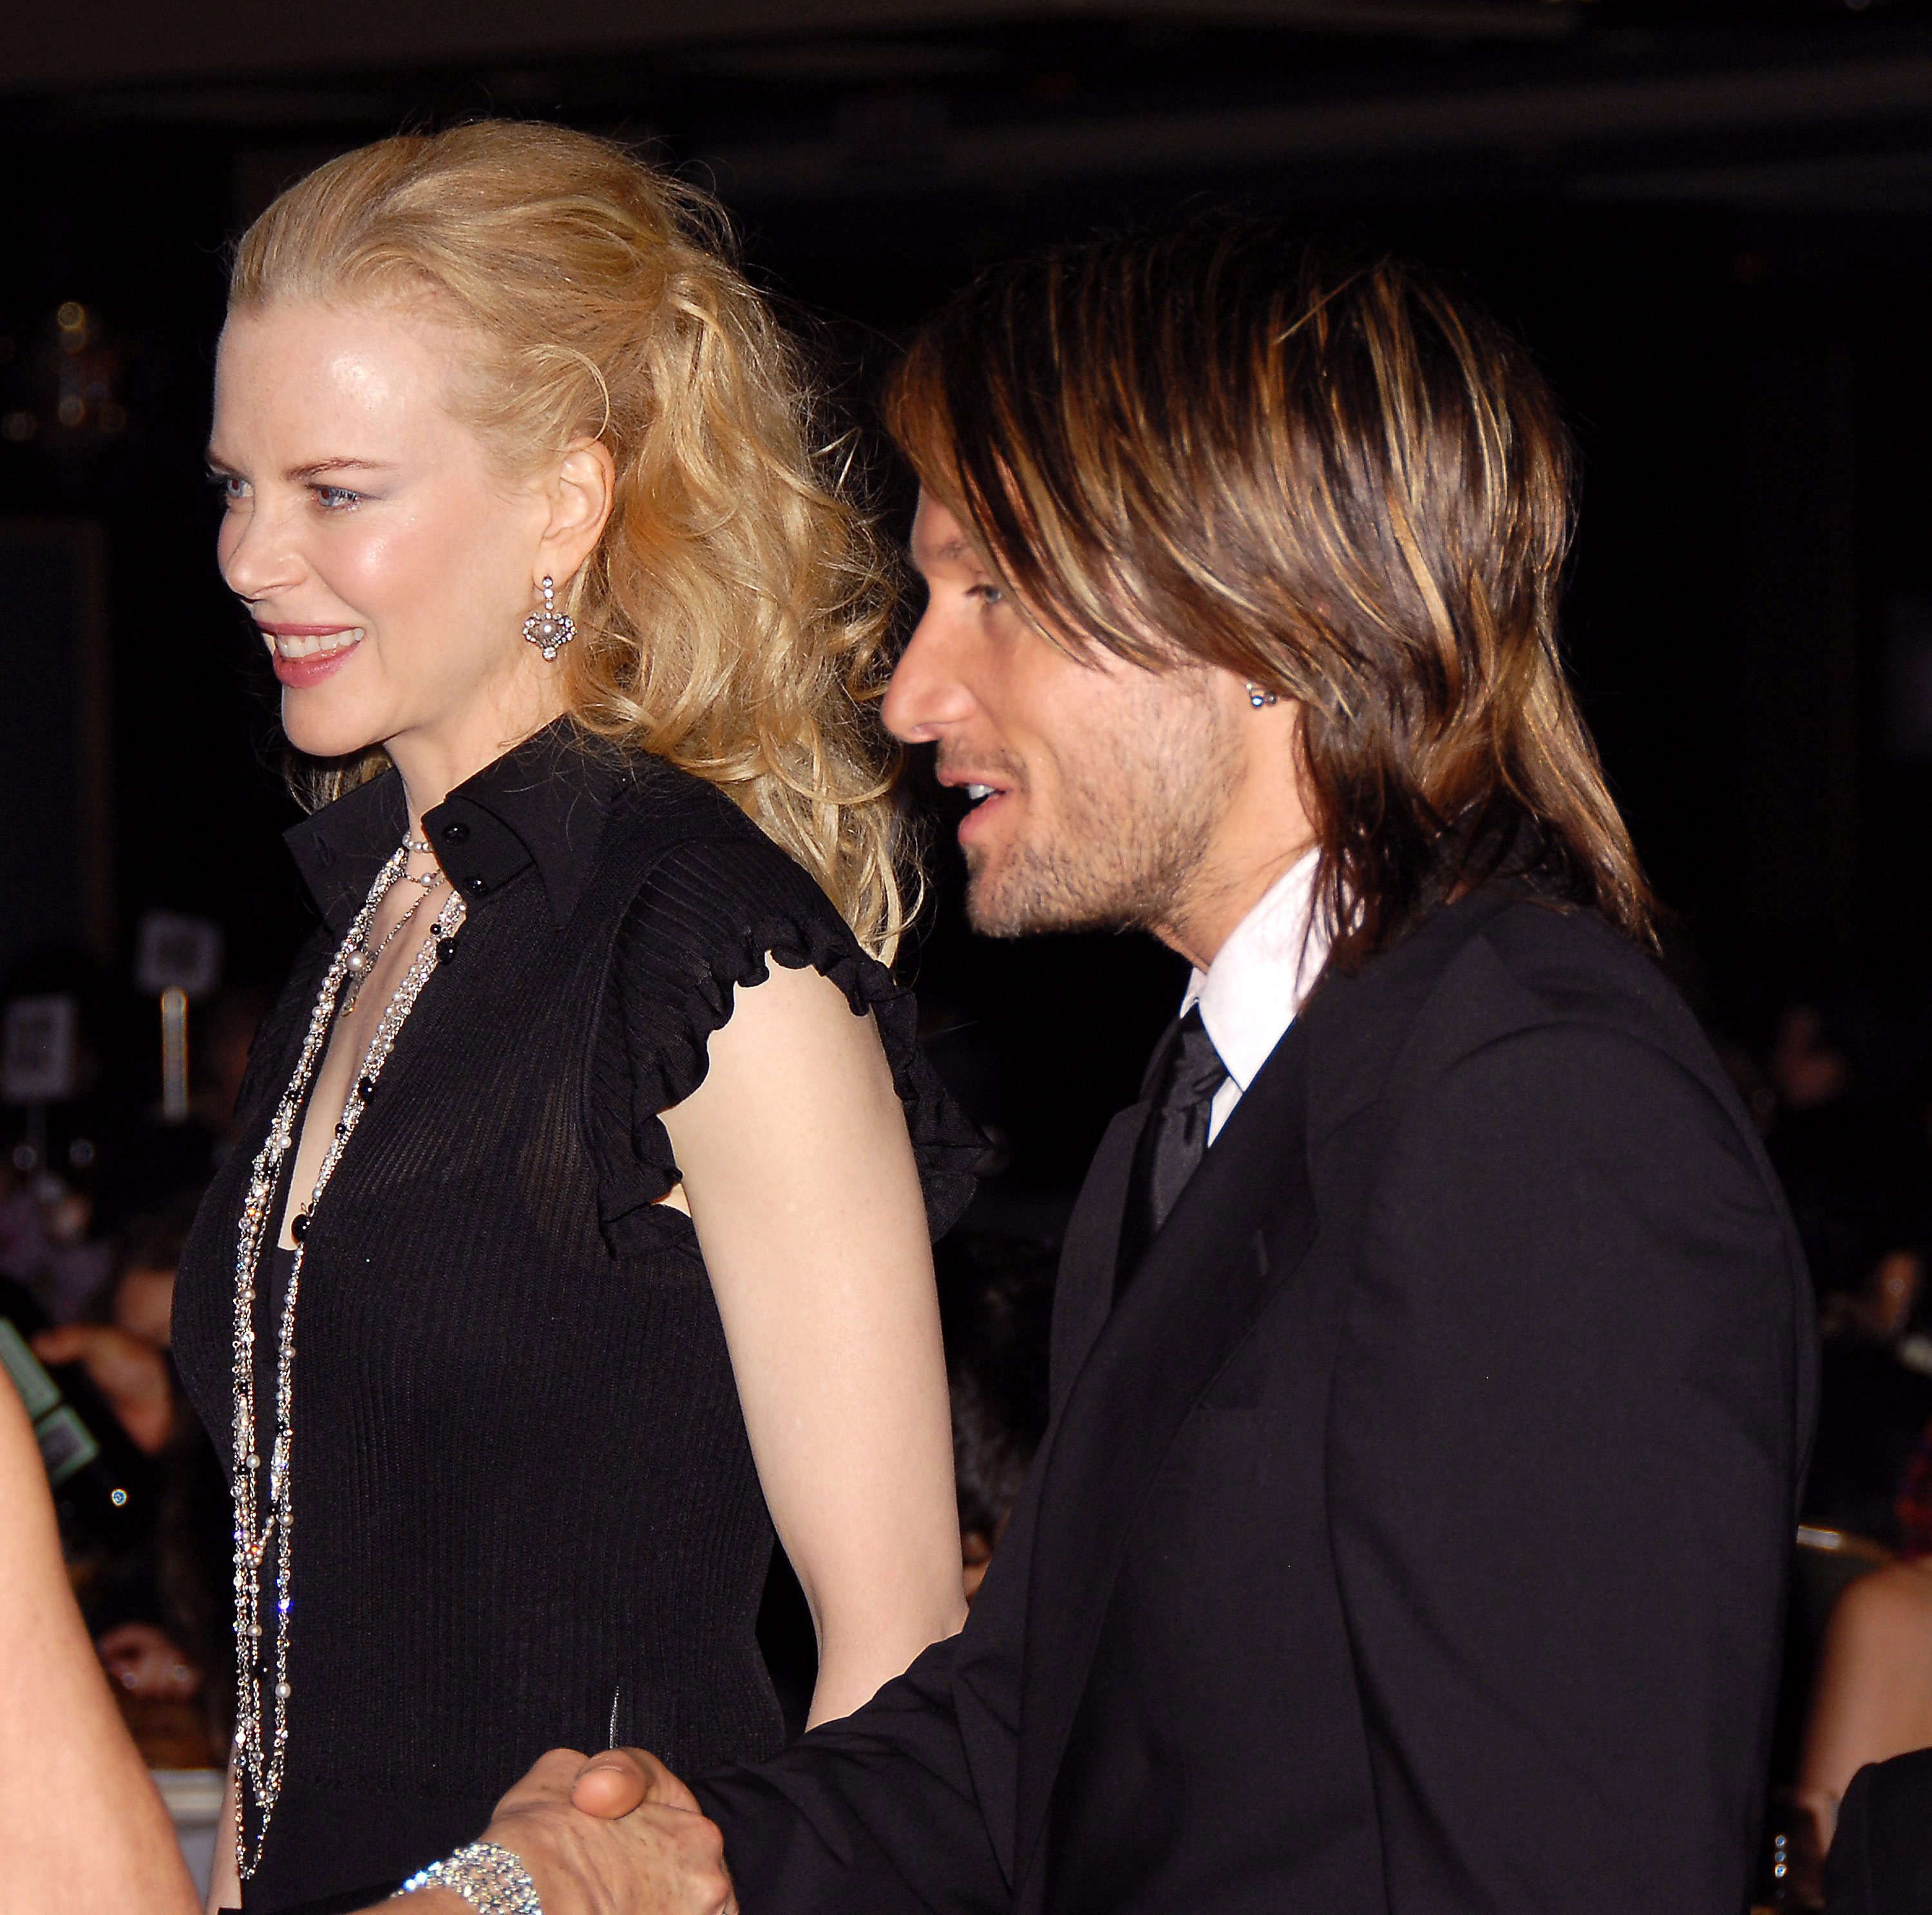 Nicole Kidman and Keith Urban attend the UNIFEM's 30th Anniversary Celebration in New York City on May 13, 2006. | Source: Getty Images 